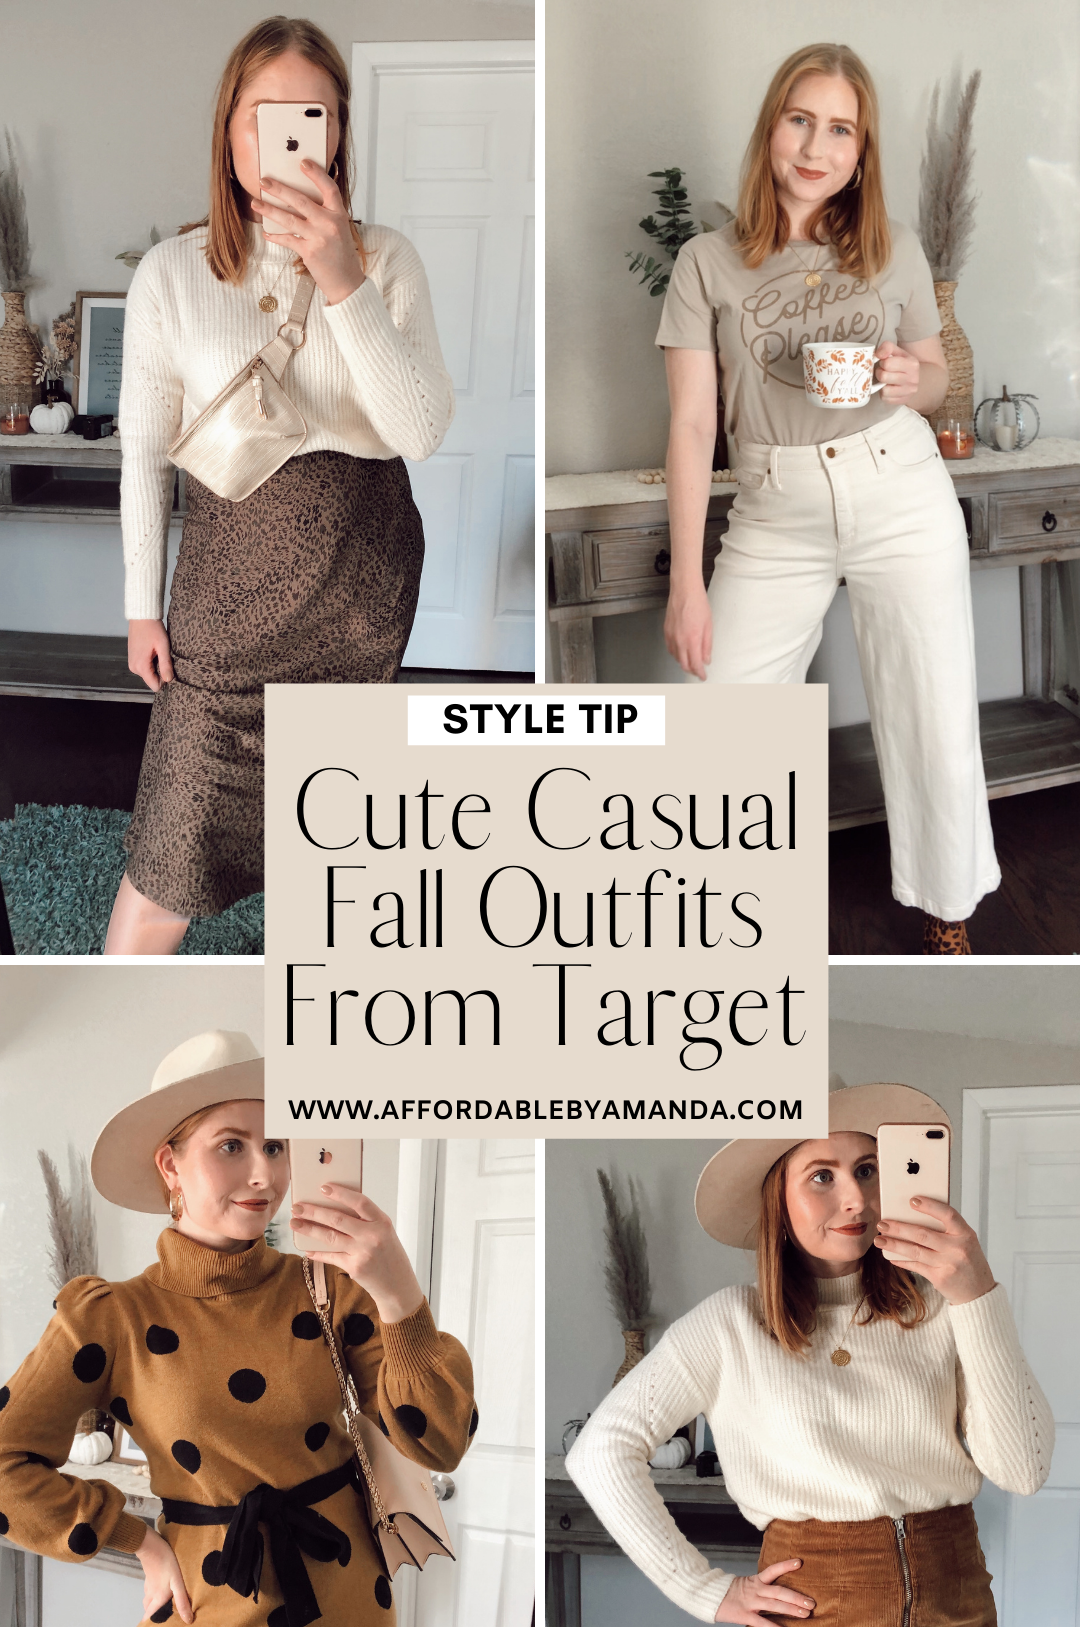 Trendy Outfit Ideas  Trendy fall outfits, Casual outfits, Stylish outfits